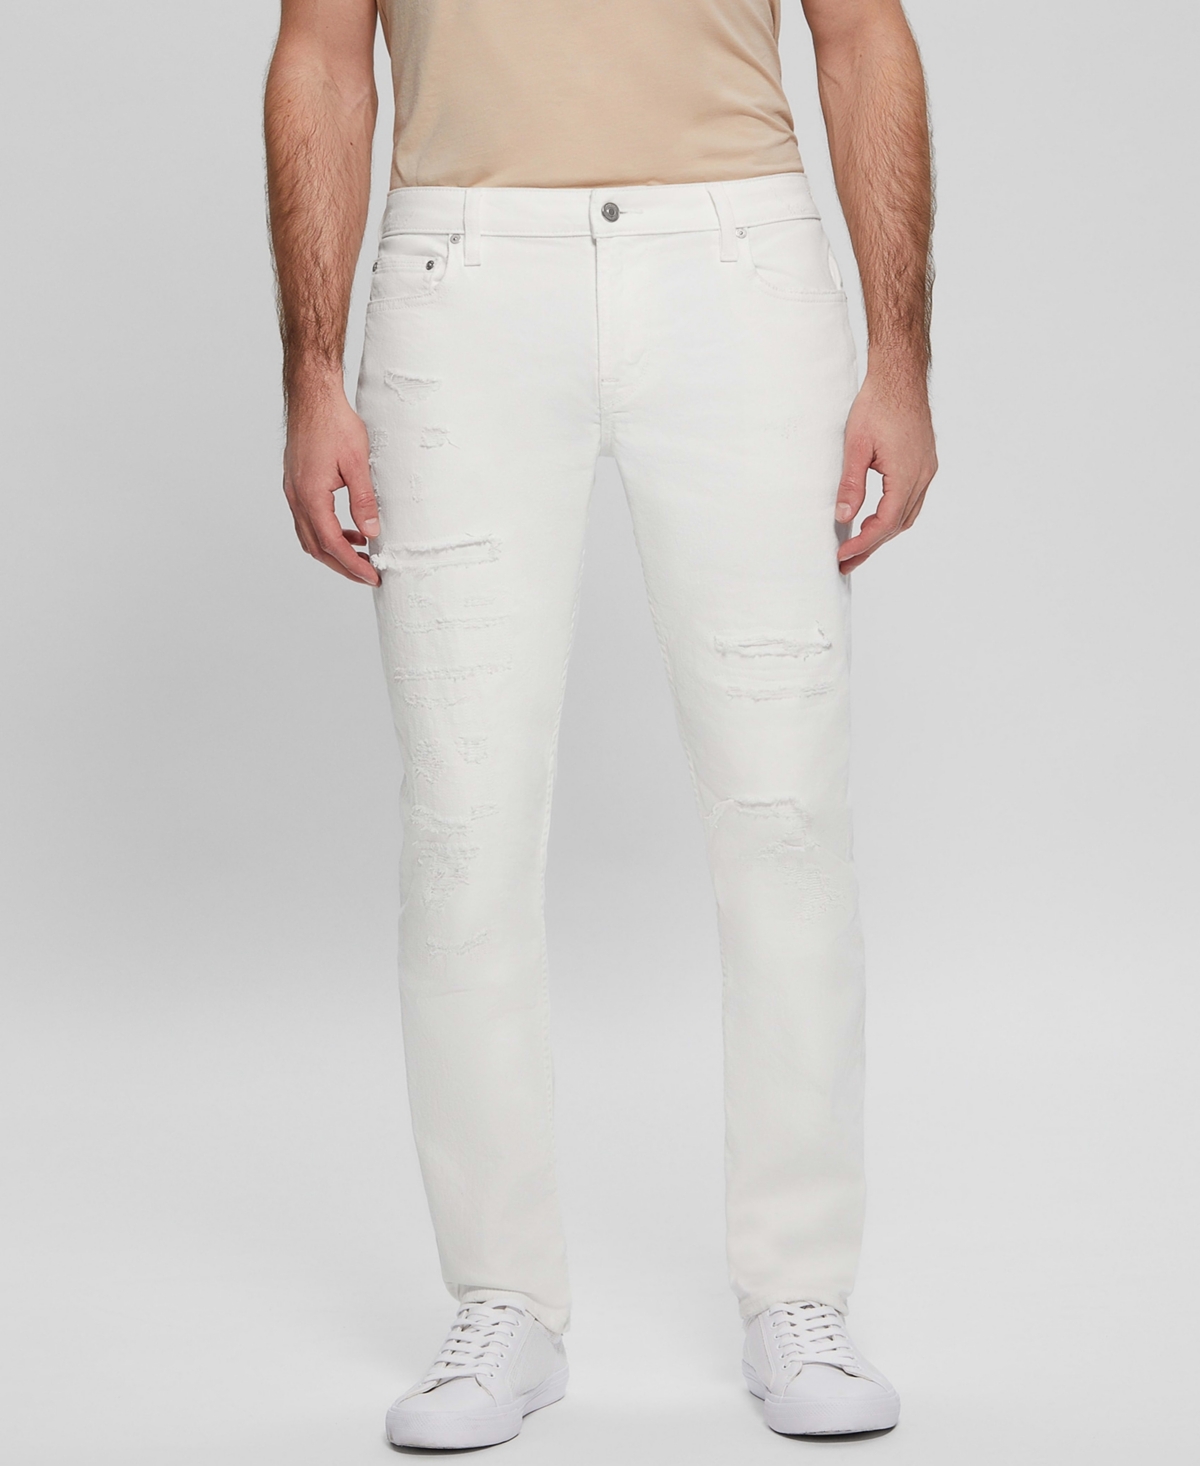 Guess Men's Slim Tapered Jeans In White